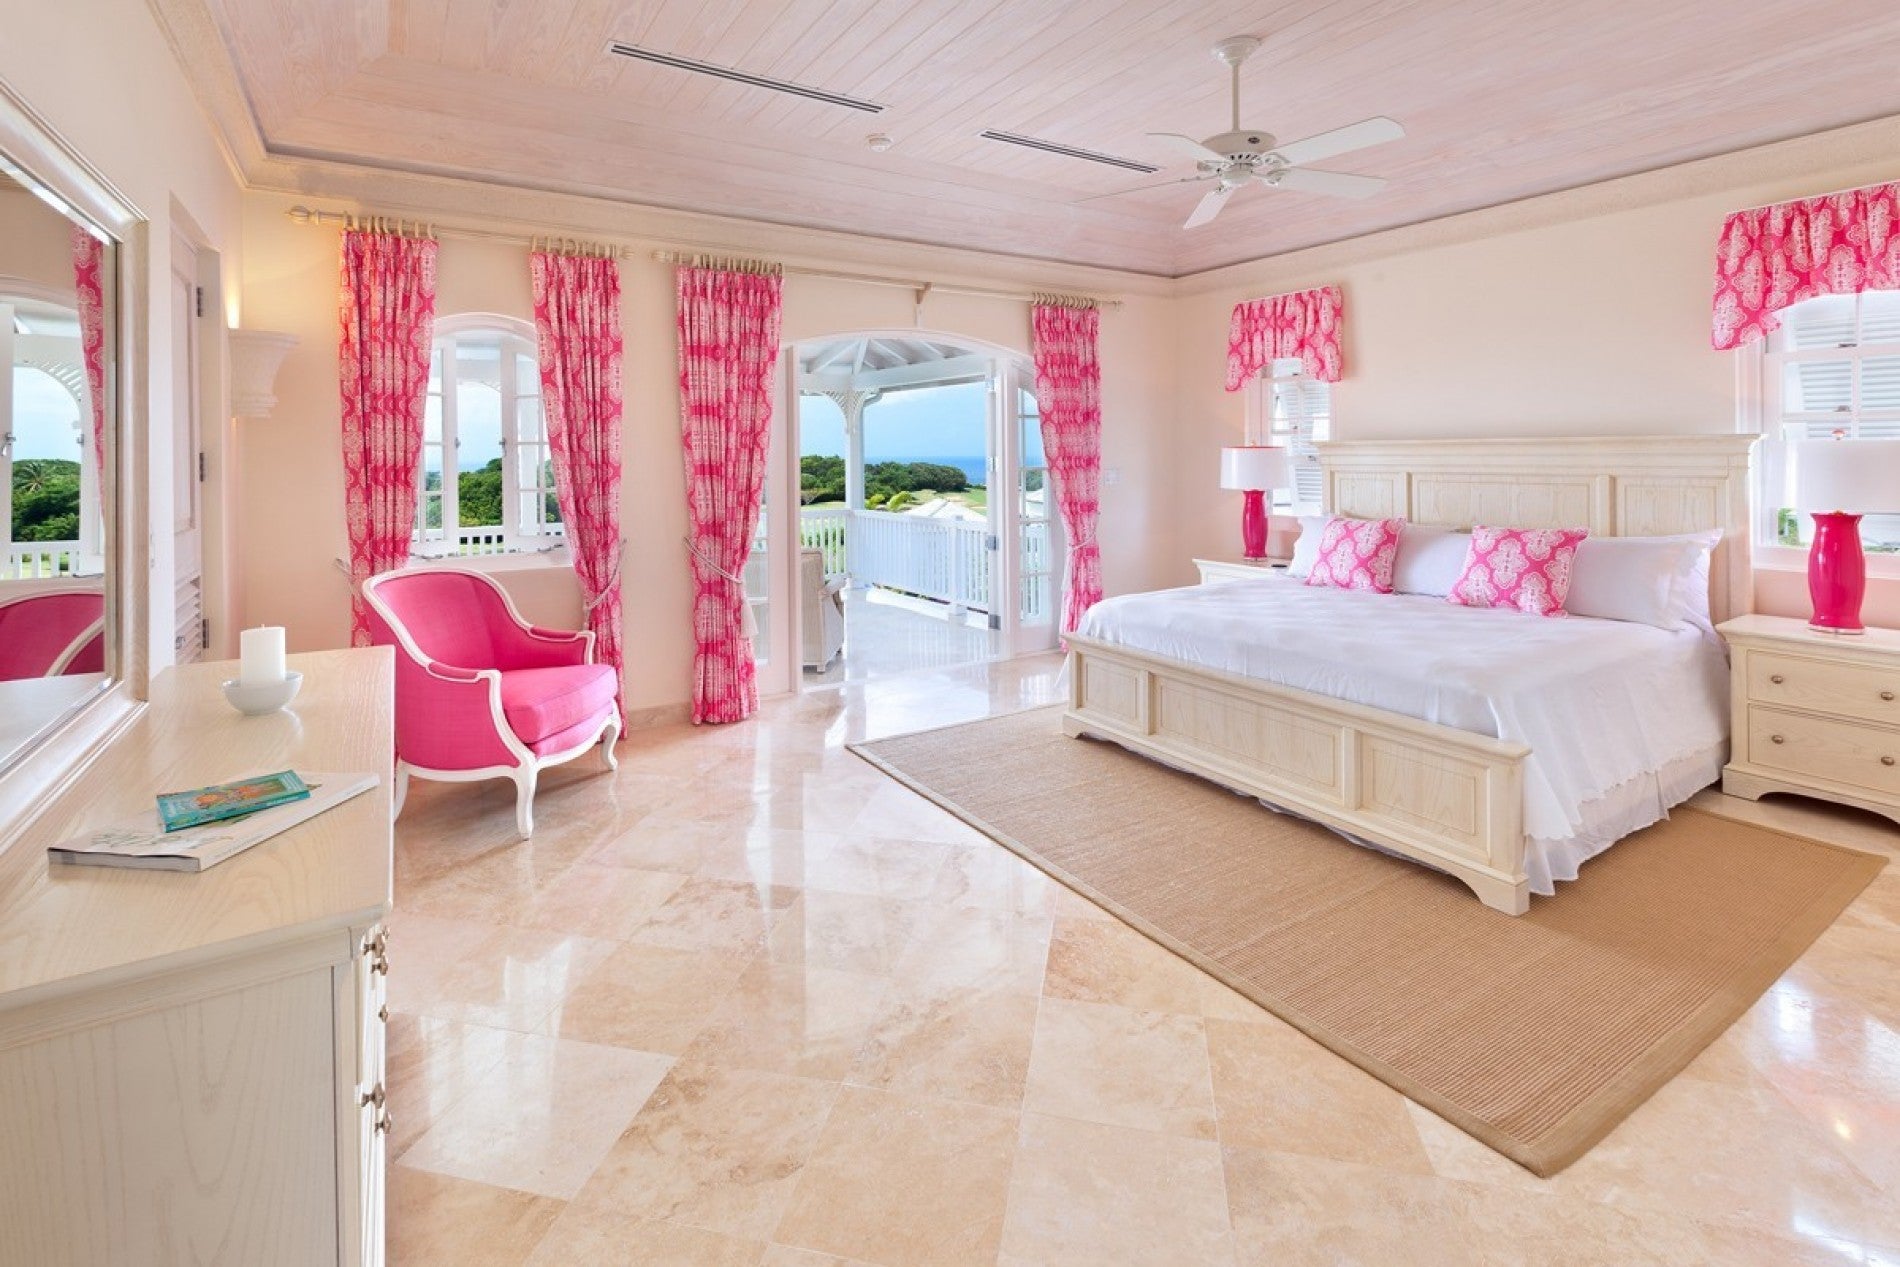 traditional bedroom with pink curtains and decor